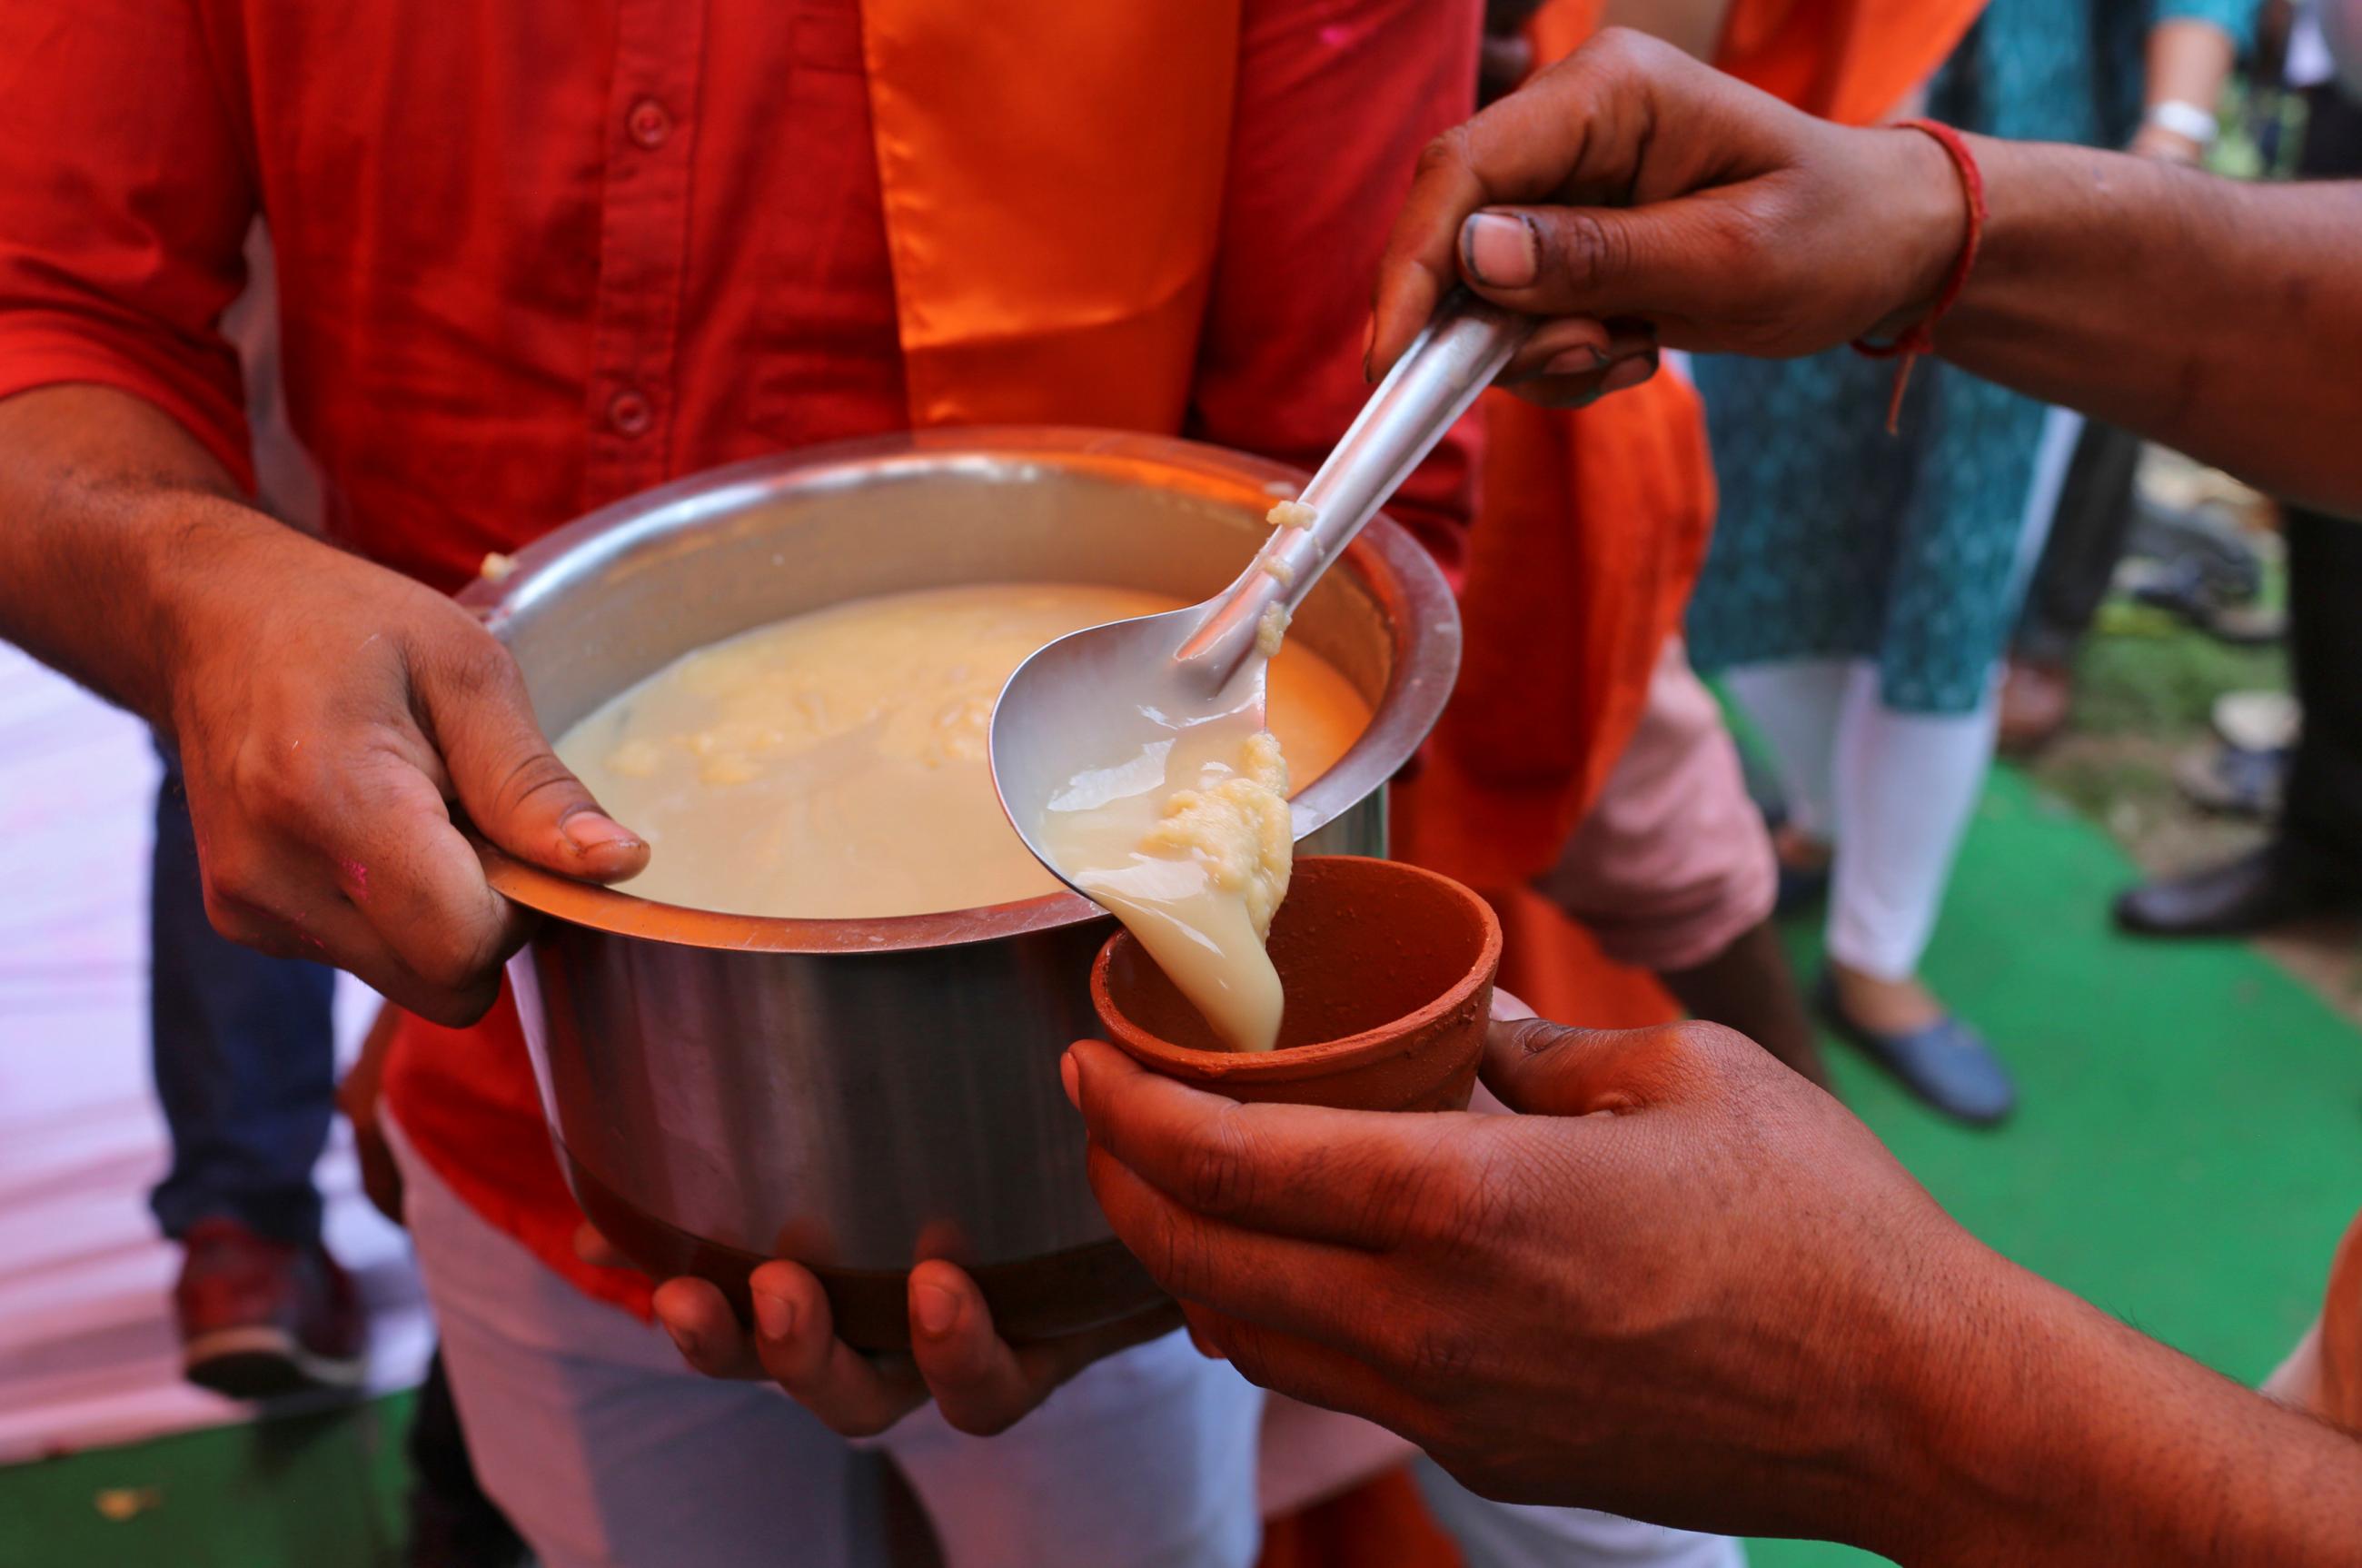 Members of All India Hindu Mahasabha serve a traditional drink with cow urine as an ingredient during a gaumutra (cow urine) party, which according to them helps in warding off coronavirus disease (COVID-19), in New Delhi, India March 14, 2020.